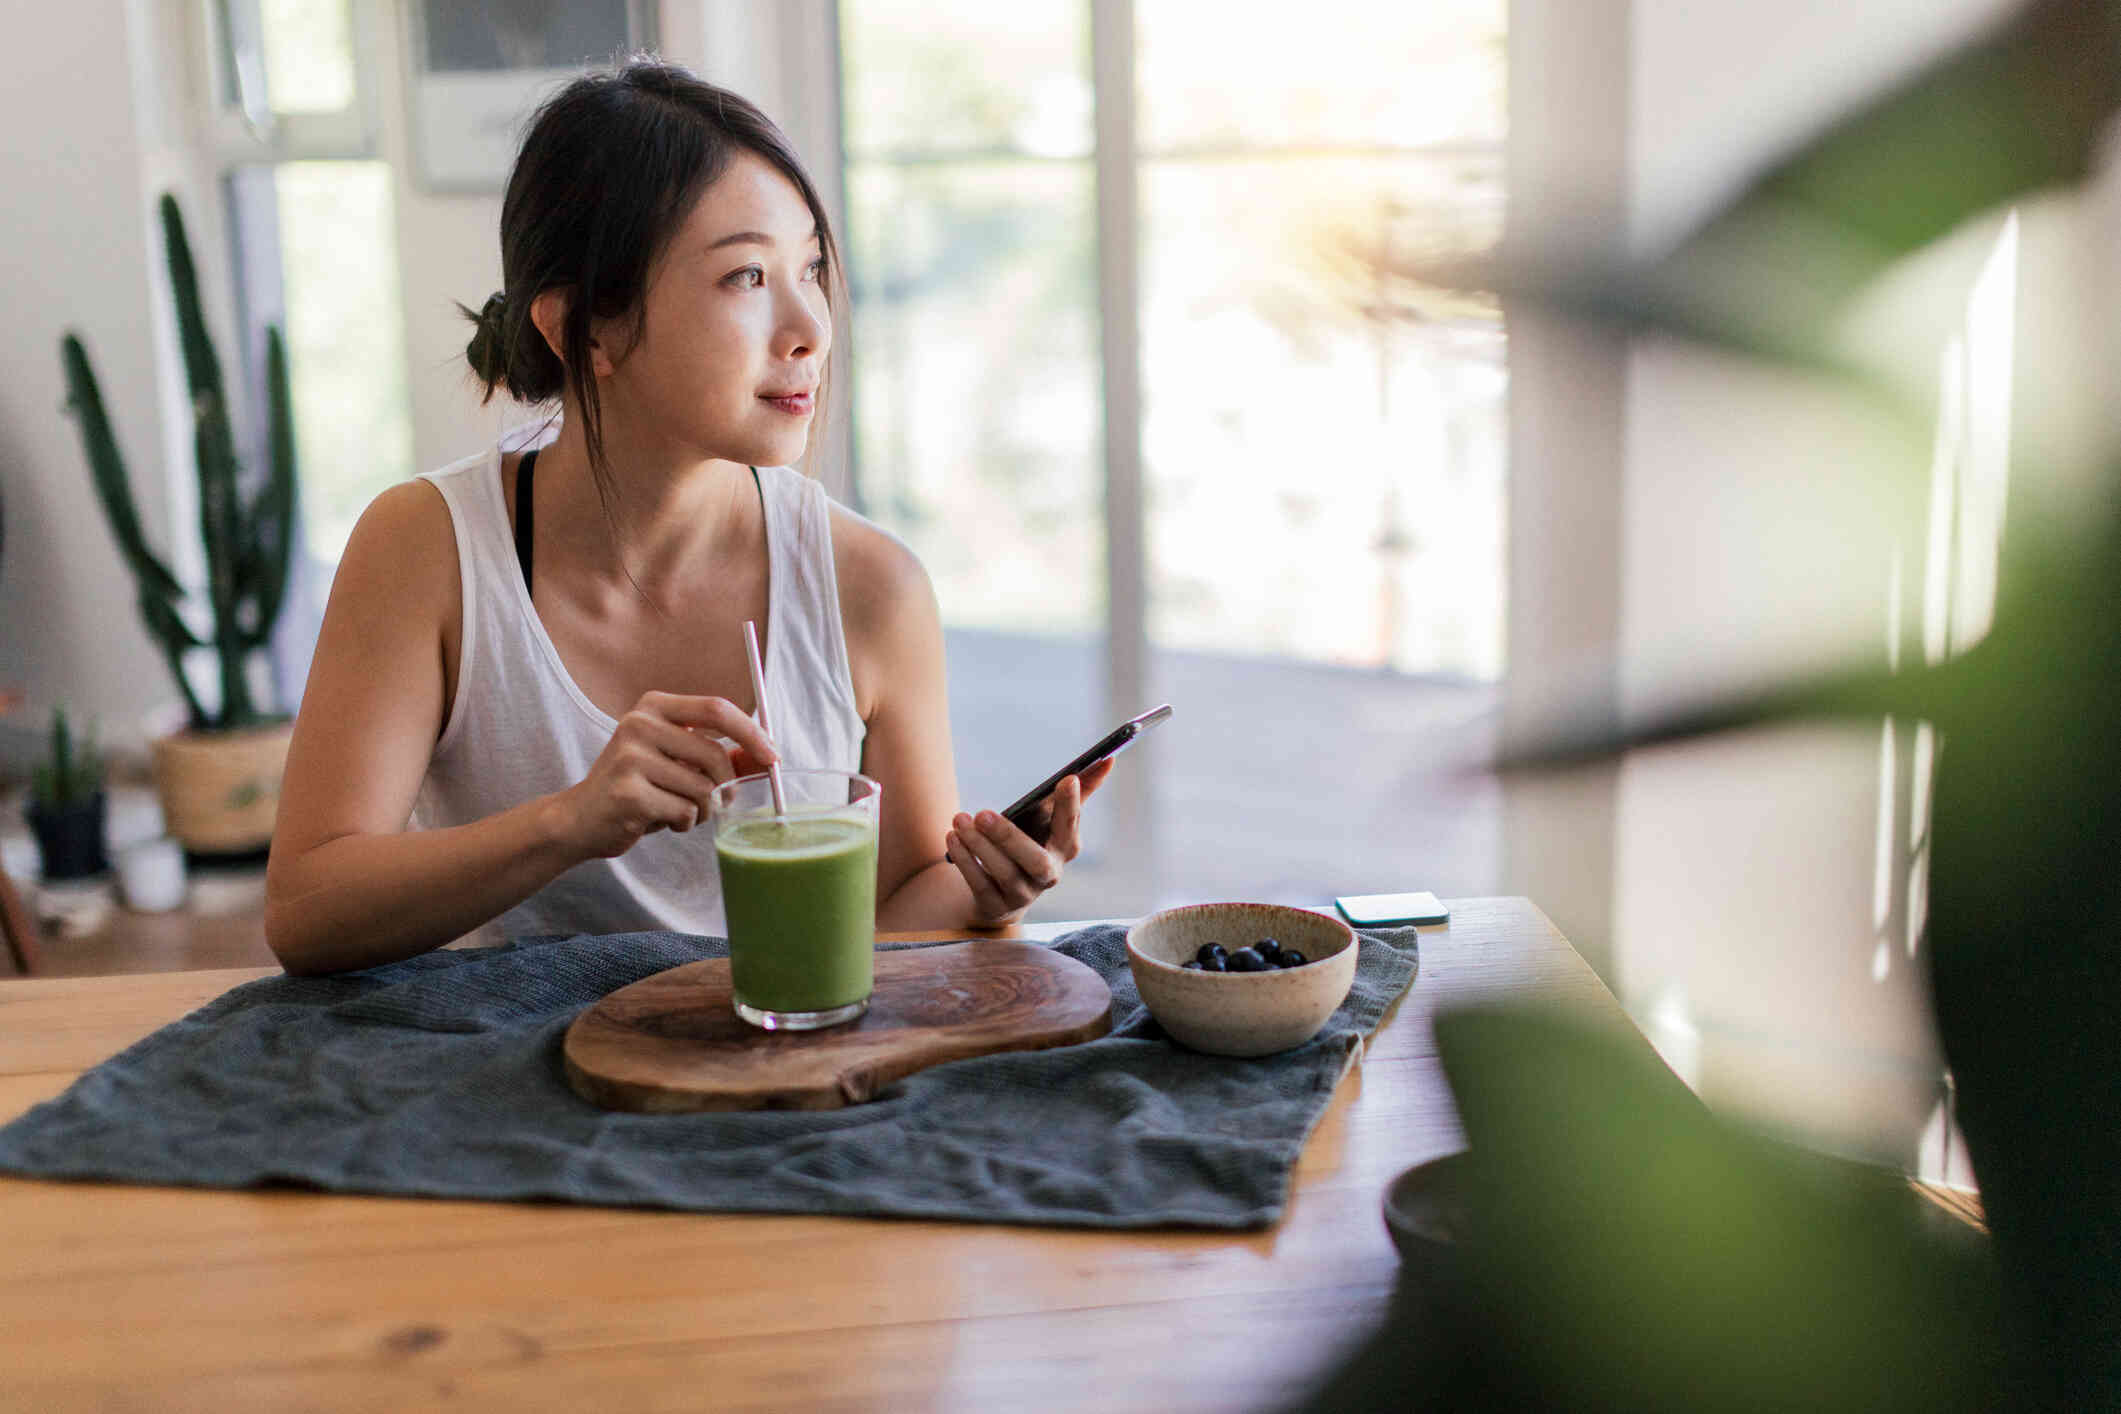 A woman in a white shirt sits at the kitchen table with a green smoothie as she holds a phone in her hand and gazes off with a slight smile.